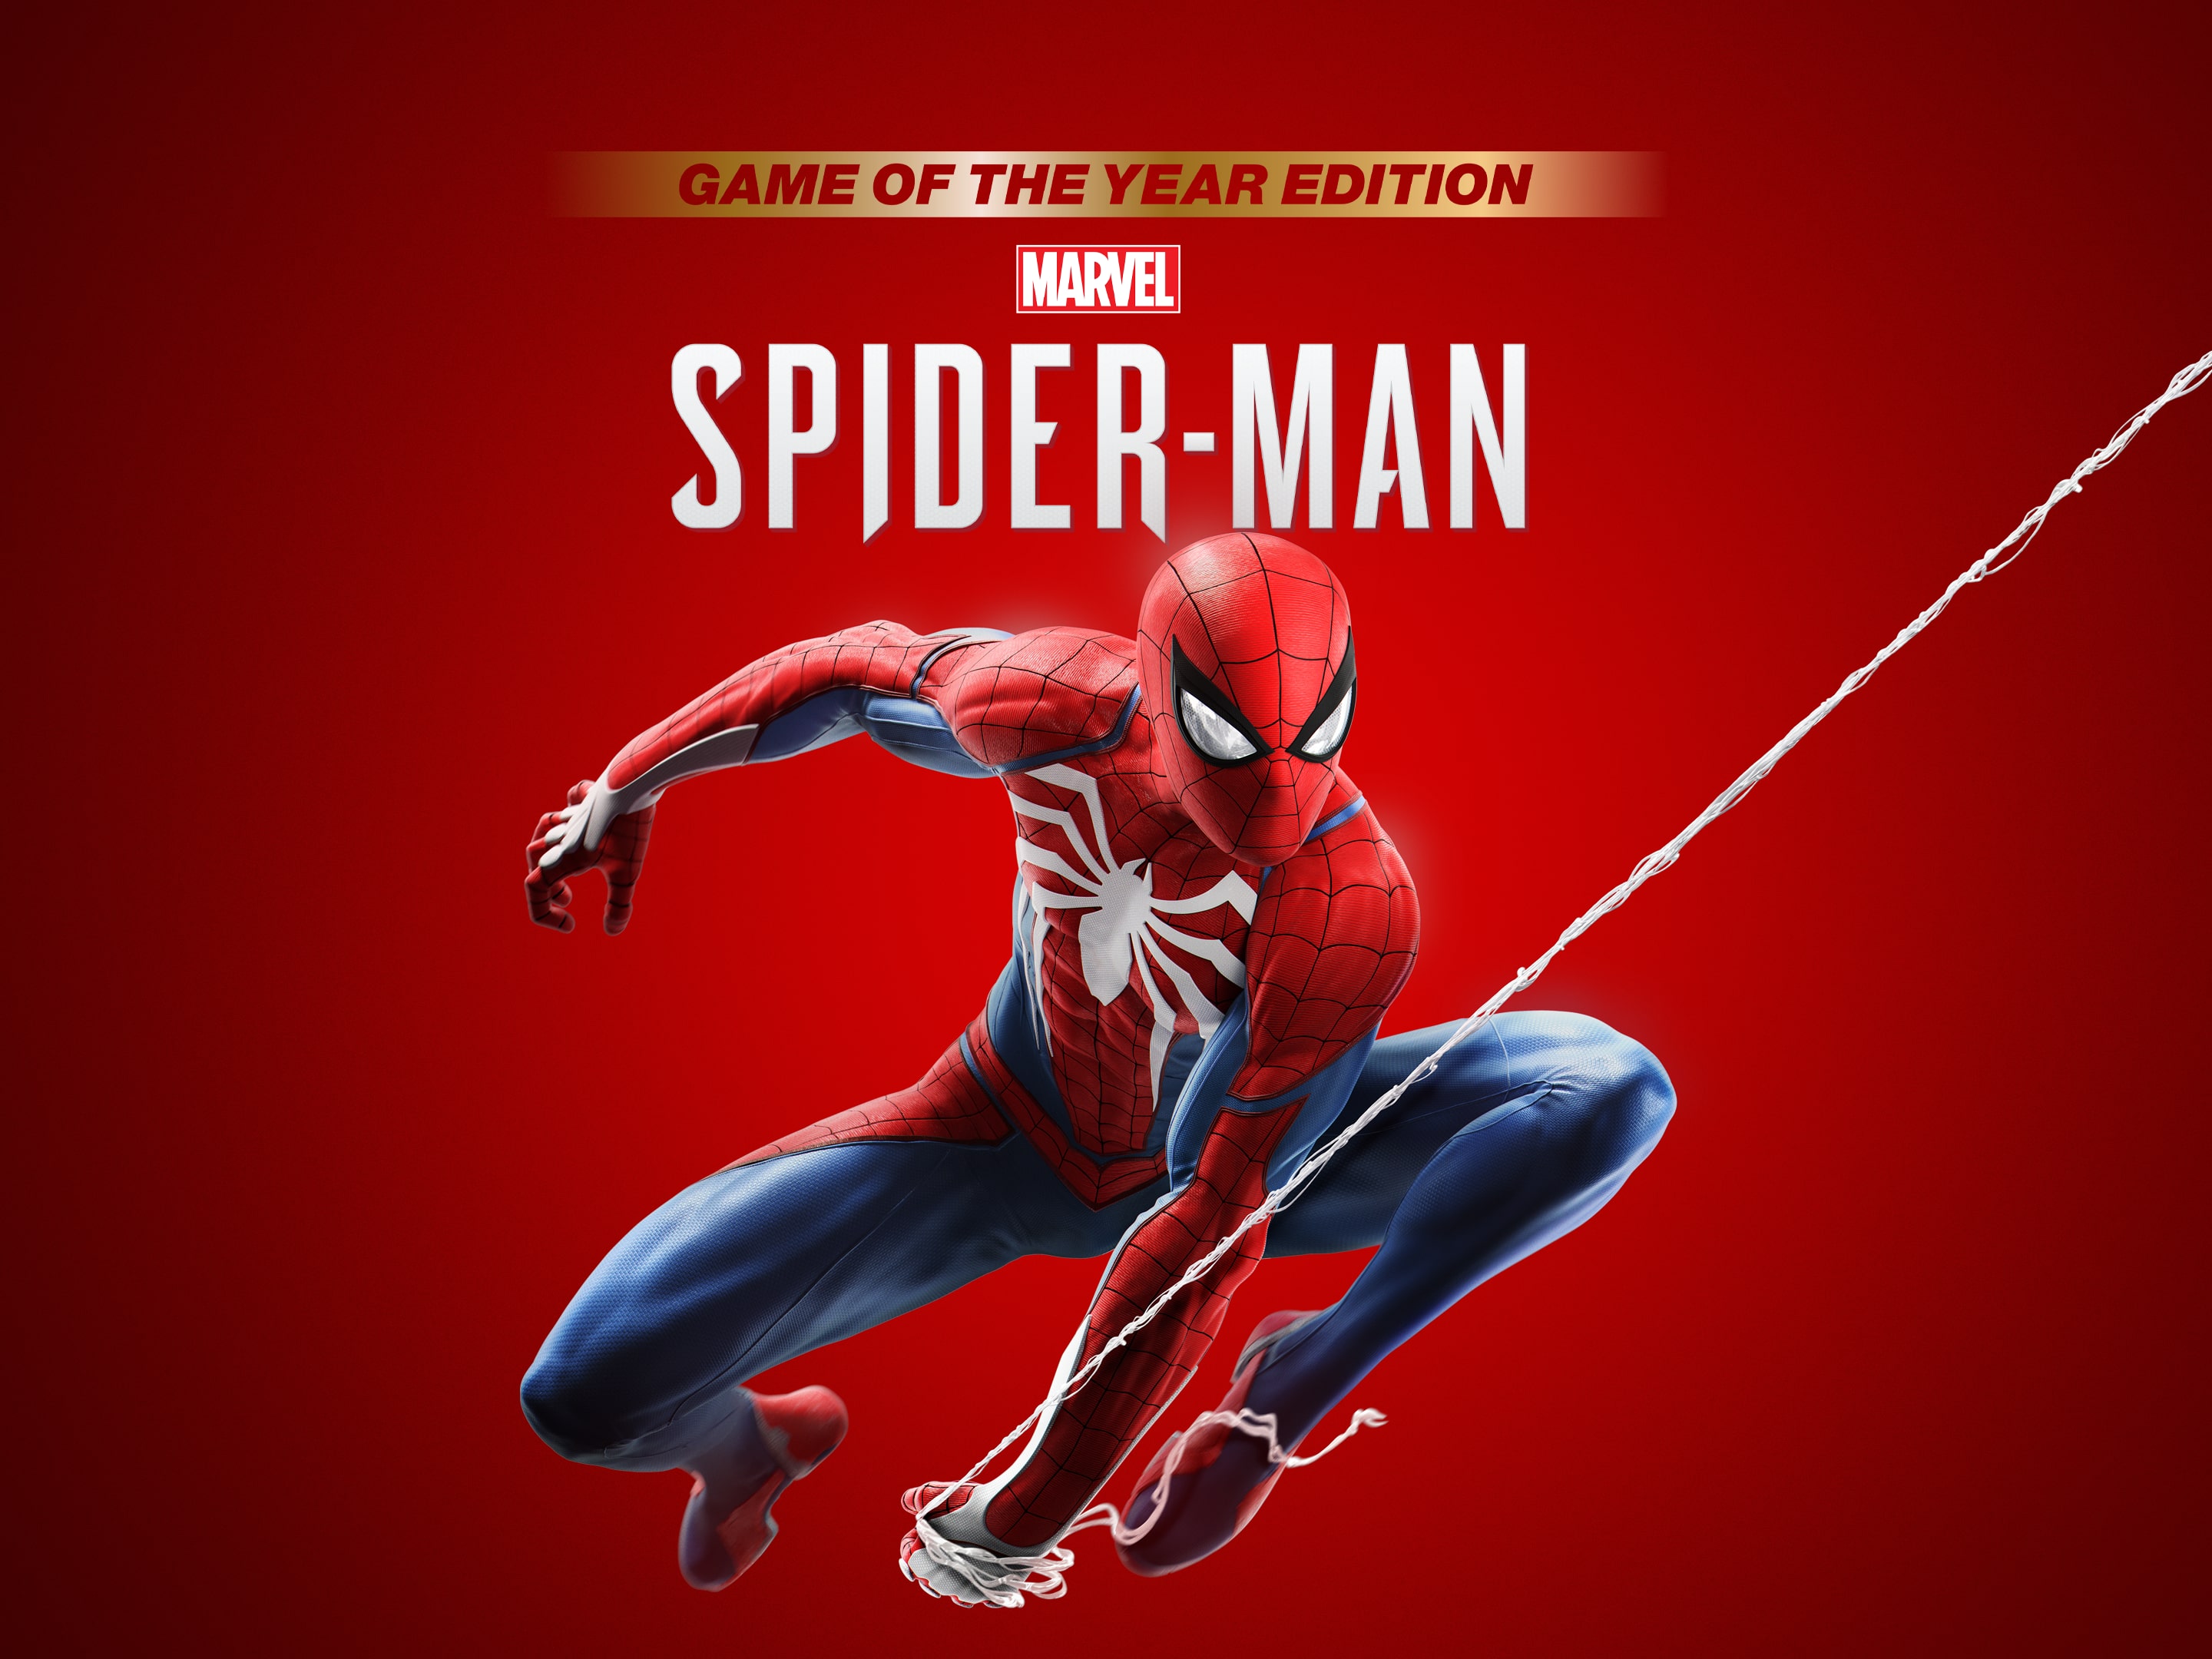 Marvel's Spider-Man: Game of Year Edition